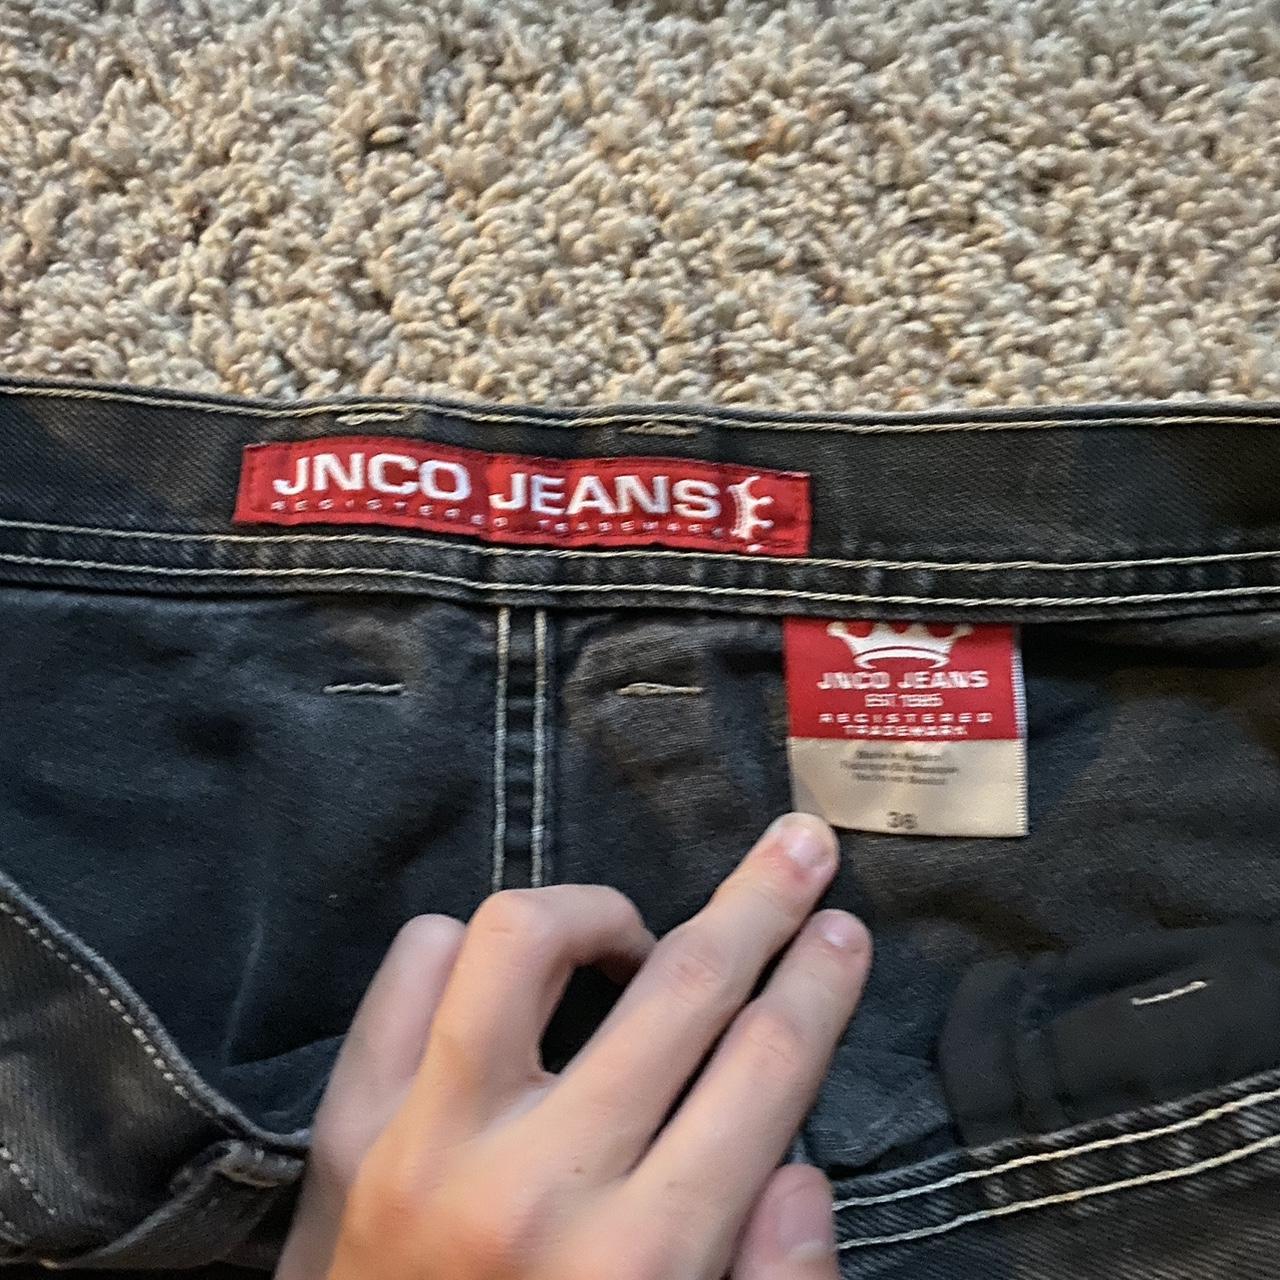 Jnco Dragon Jorts Insanely Rare Grails Another... - Depop